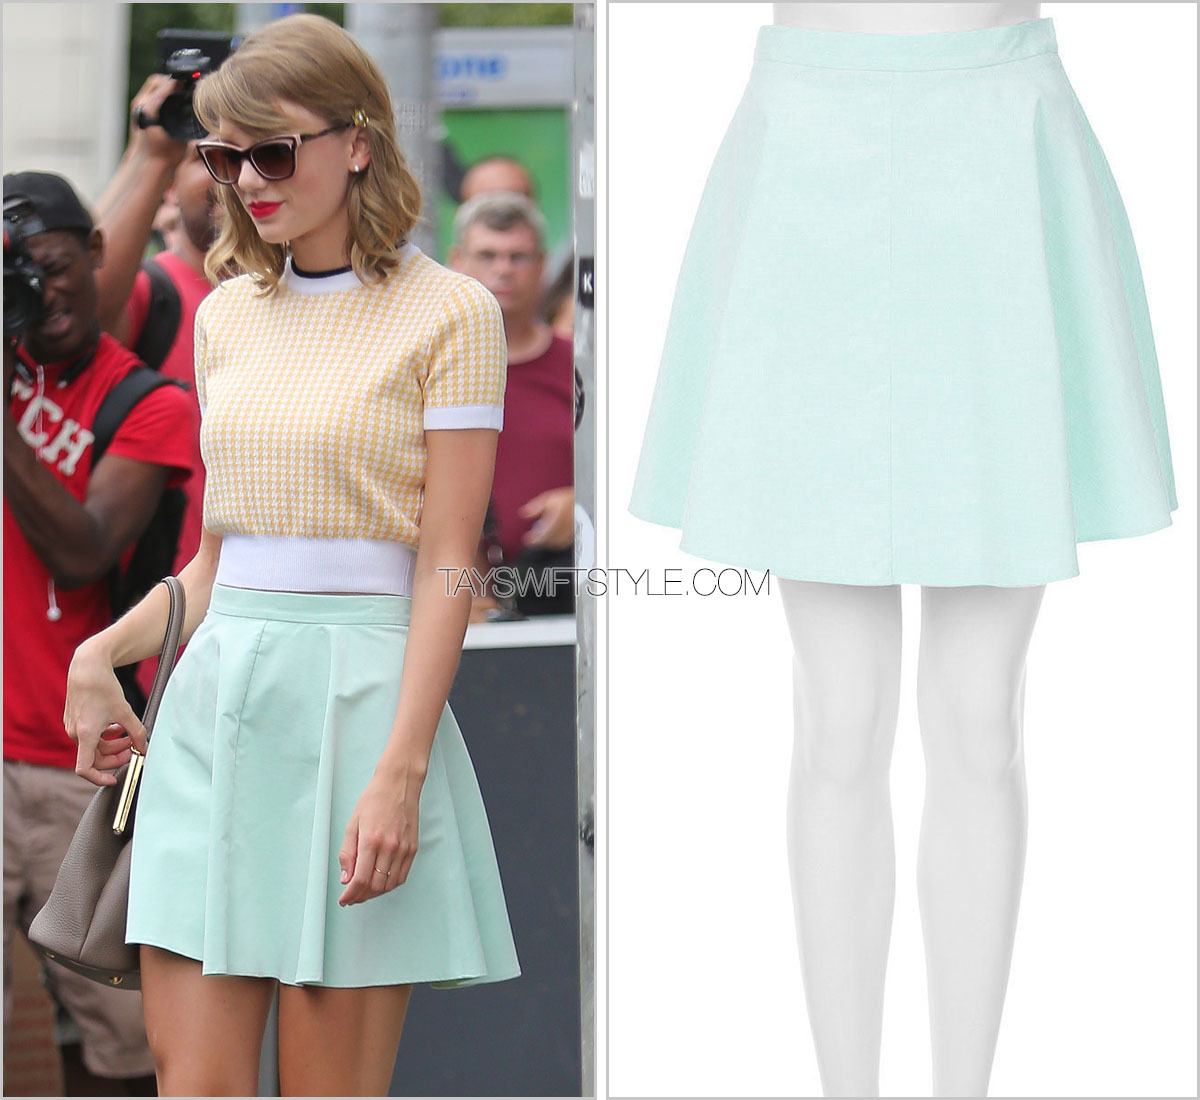 Taylor Swift's $746 Matching Top and Skirt Look So Similar to This